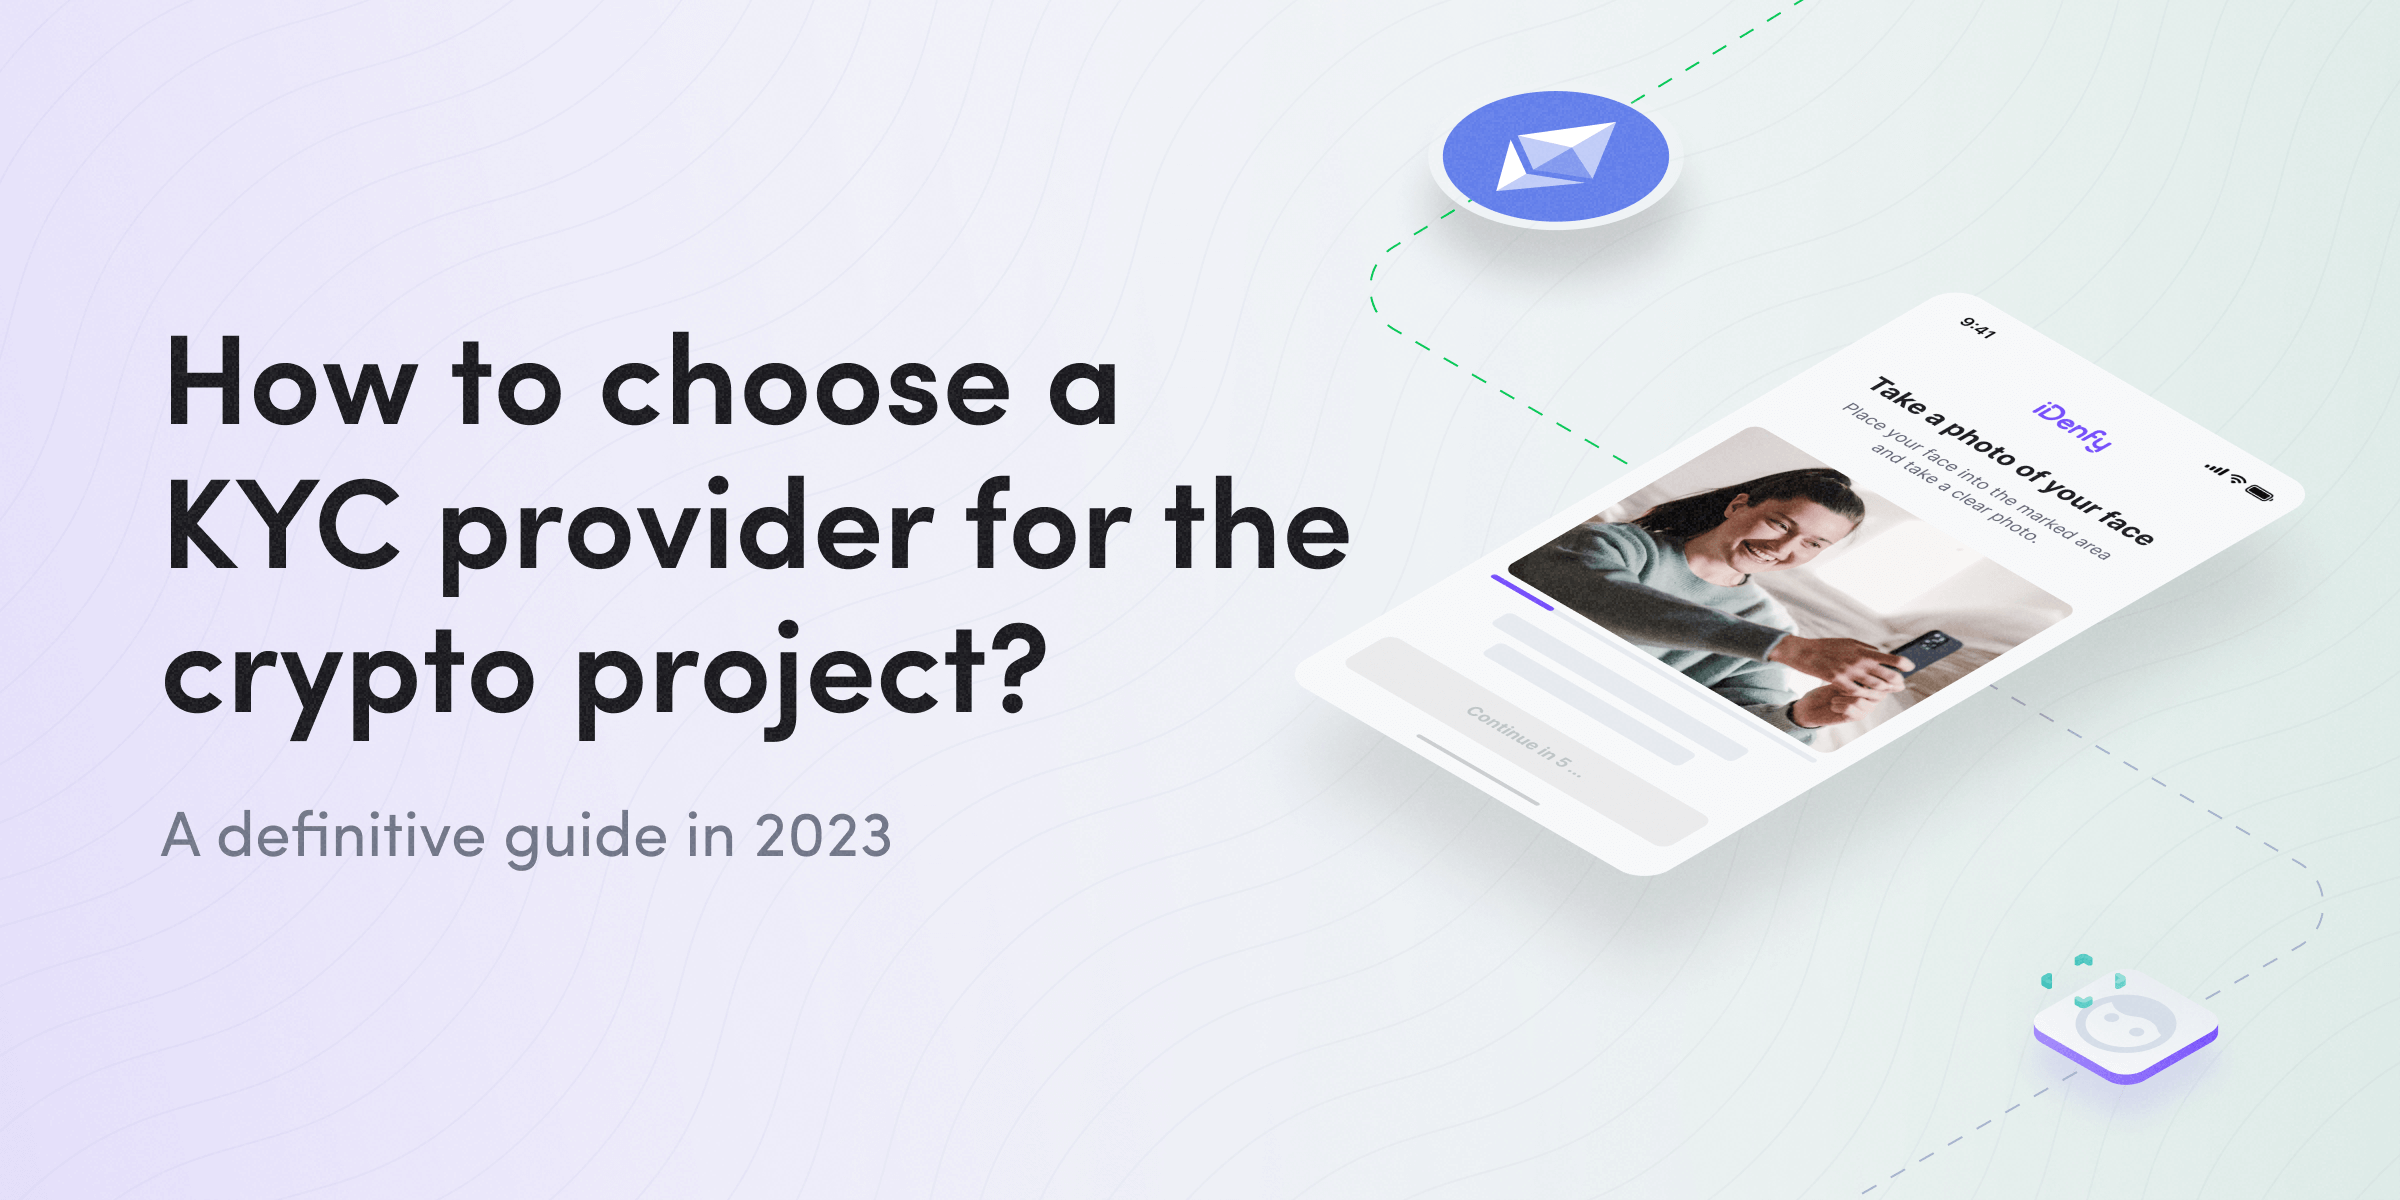 Learn on how to choose KYC provider for crypto project.